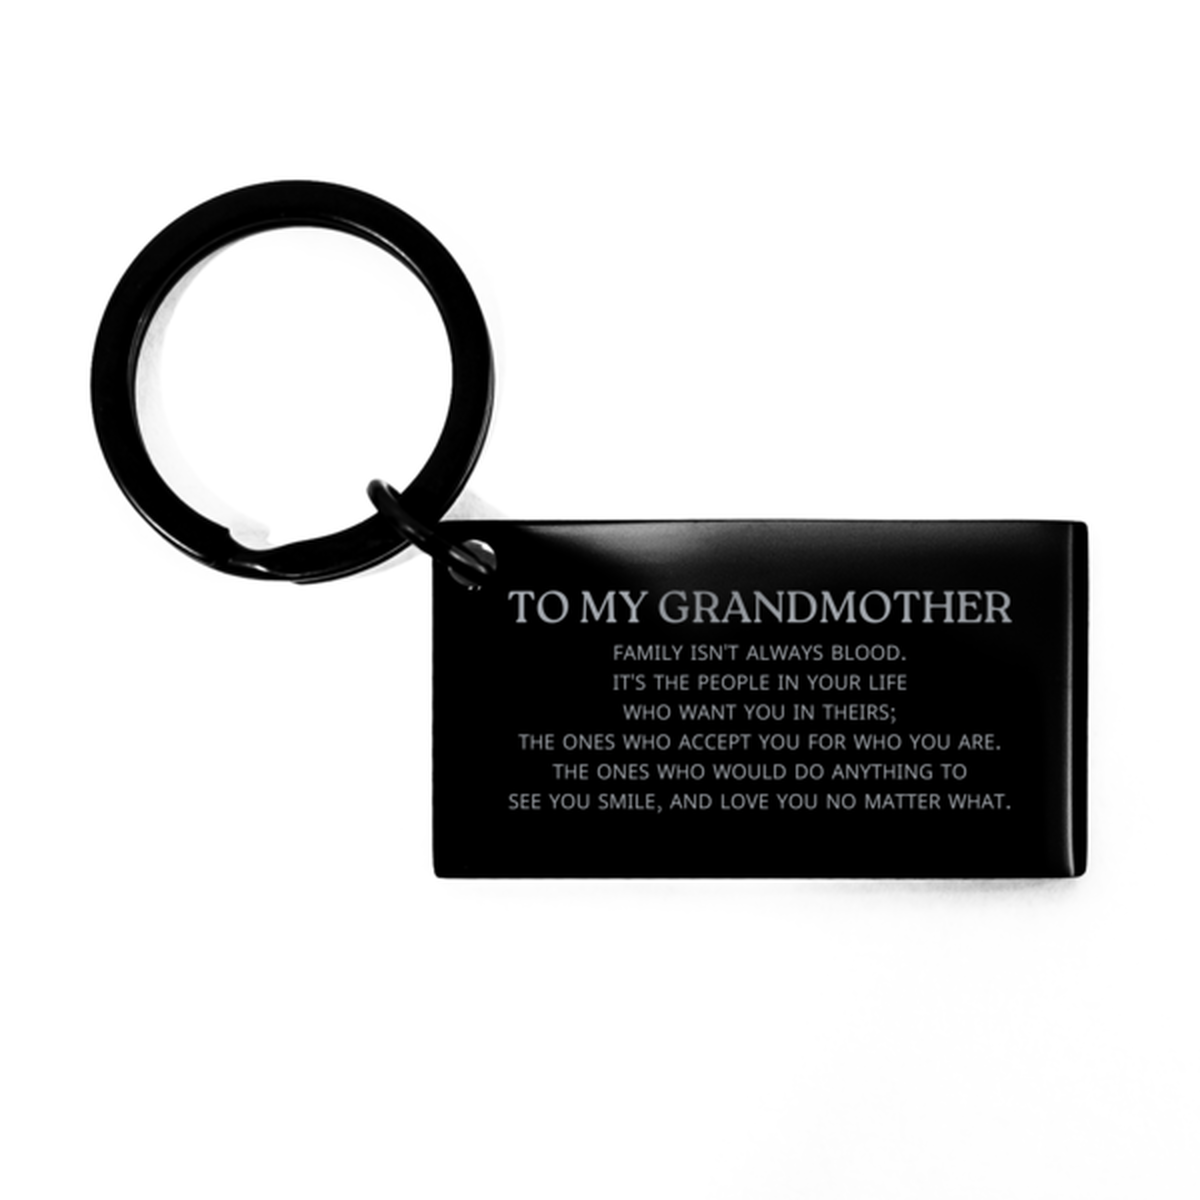 To My Grandmother Gifts, Family isn't always blood, Grandmother Keychain, Birthday Christmas Unique Present For Grandmother